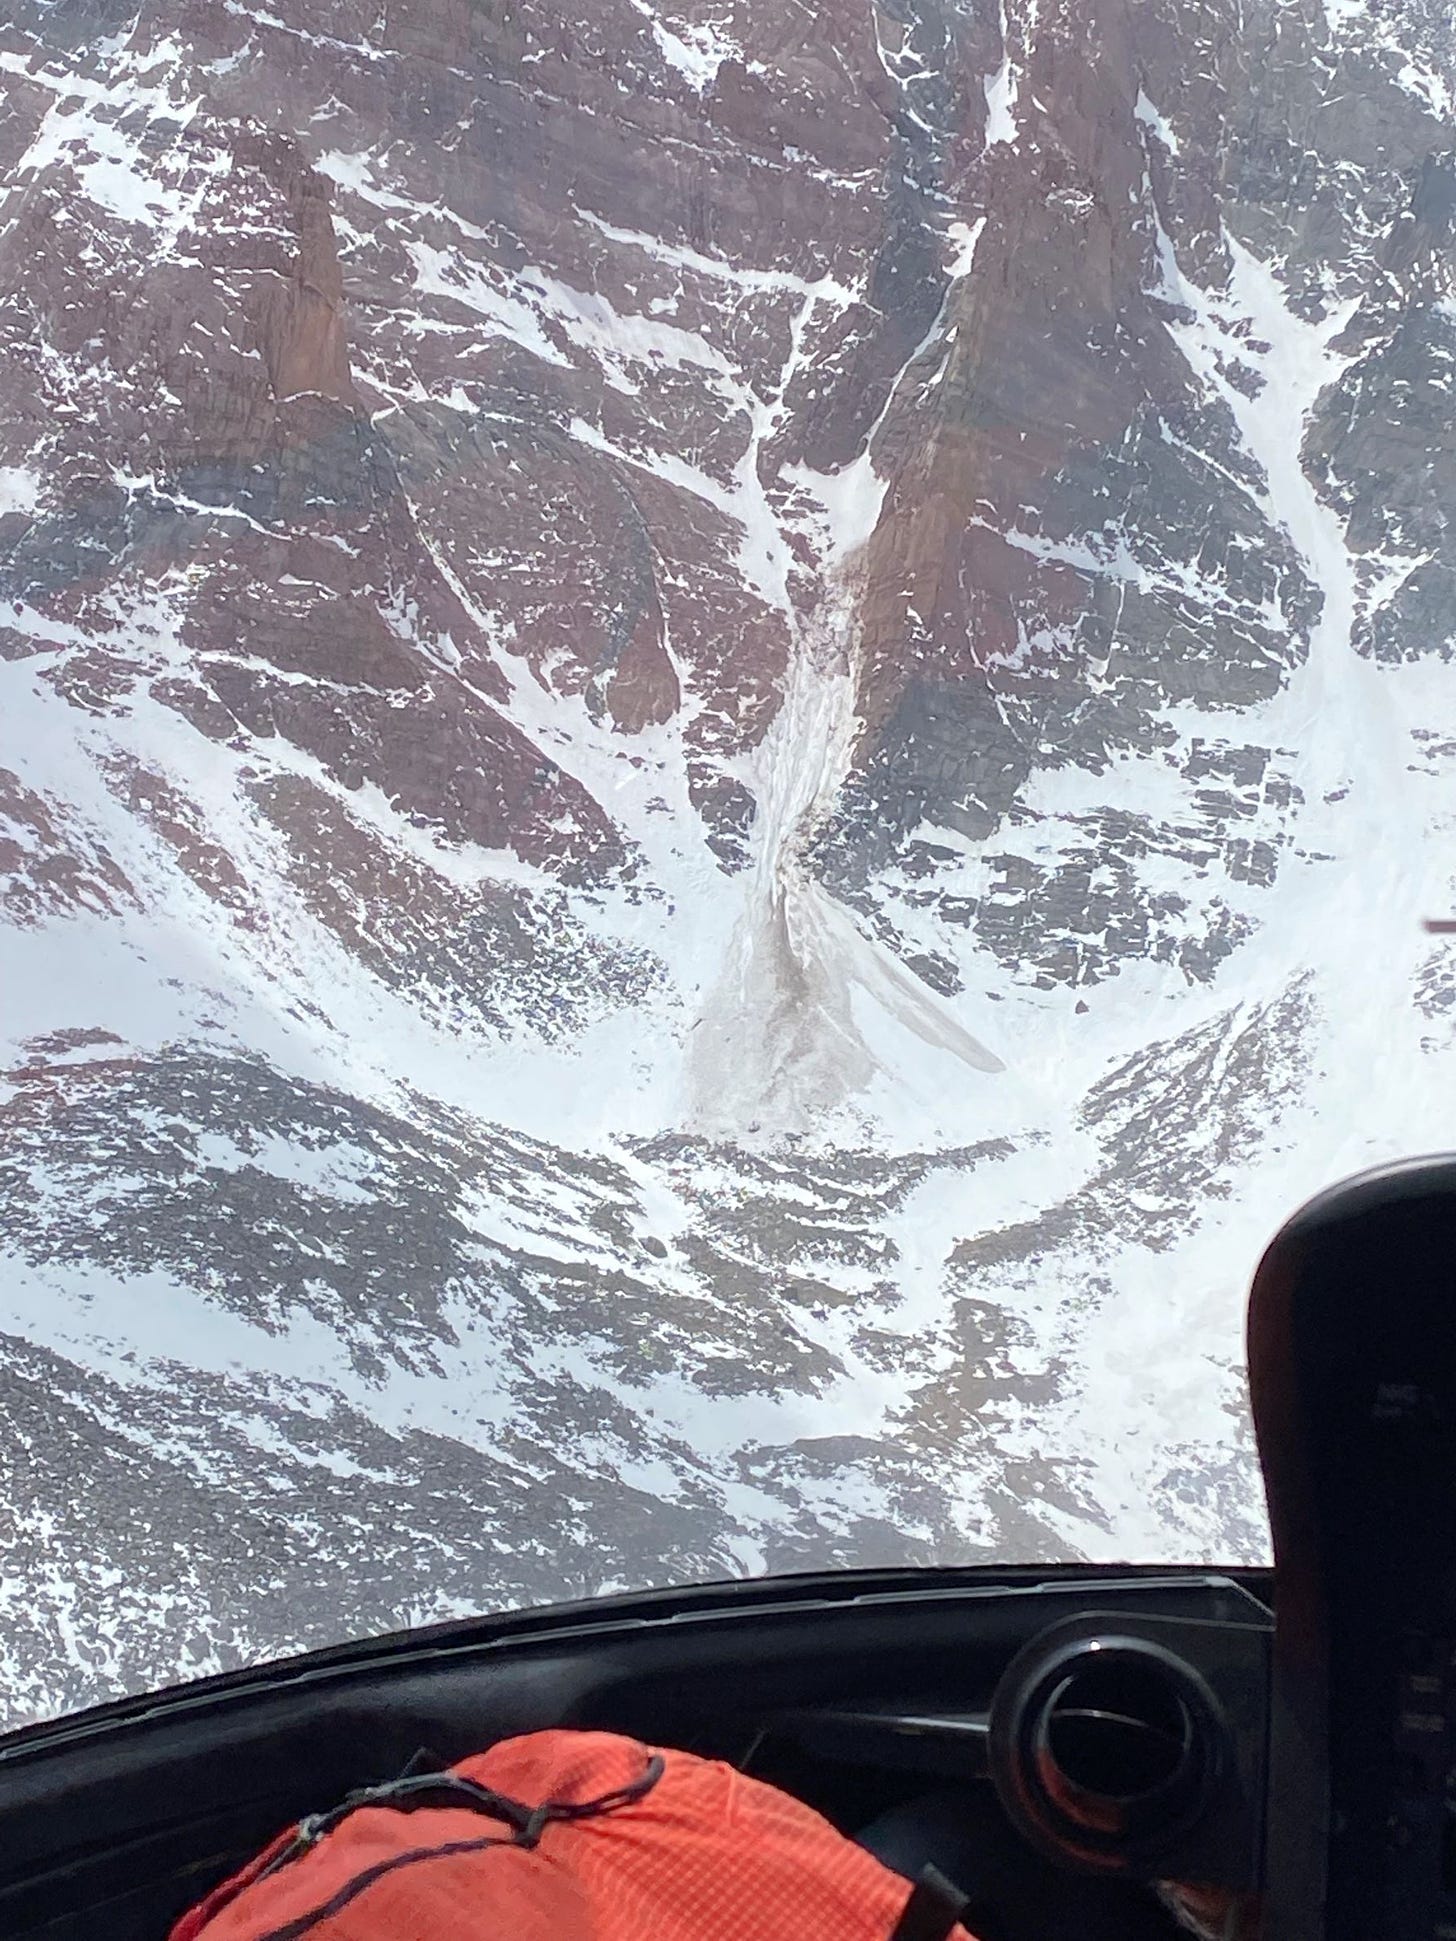 Photograph from helicopter of Dreamweaver Couloir slide on Mount Meeker Courtesy Rocky Mountain National Park smaller size 1.jpg